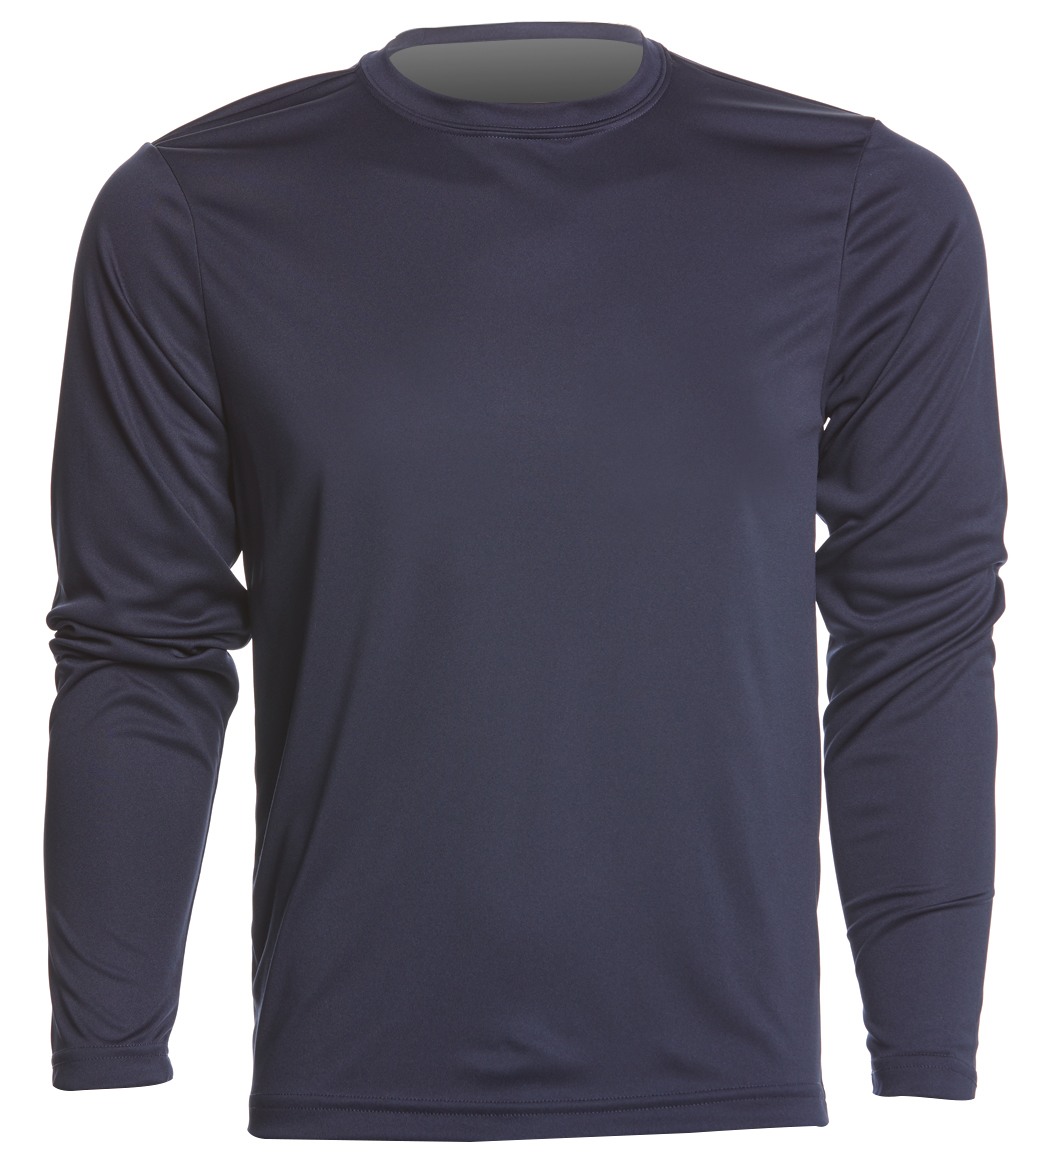 Men's Long Sleeve Posicharge Competitortm Tee Shirt - True Navy X-Small Polyester - Swimoutlet.com